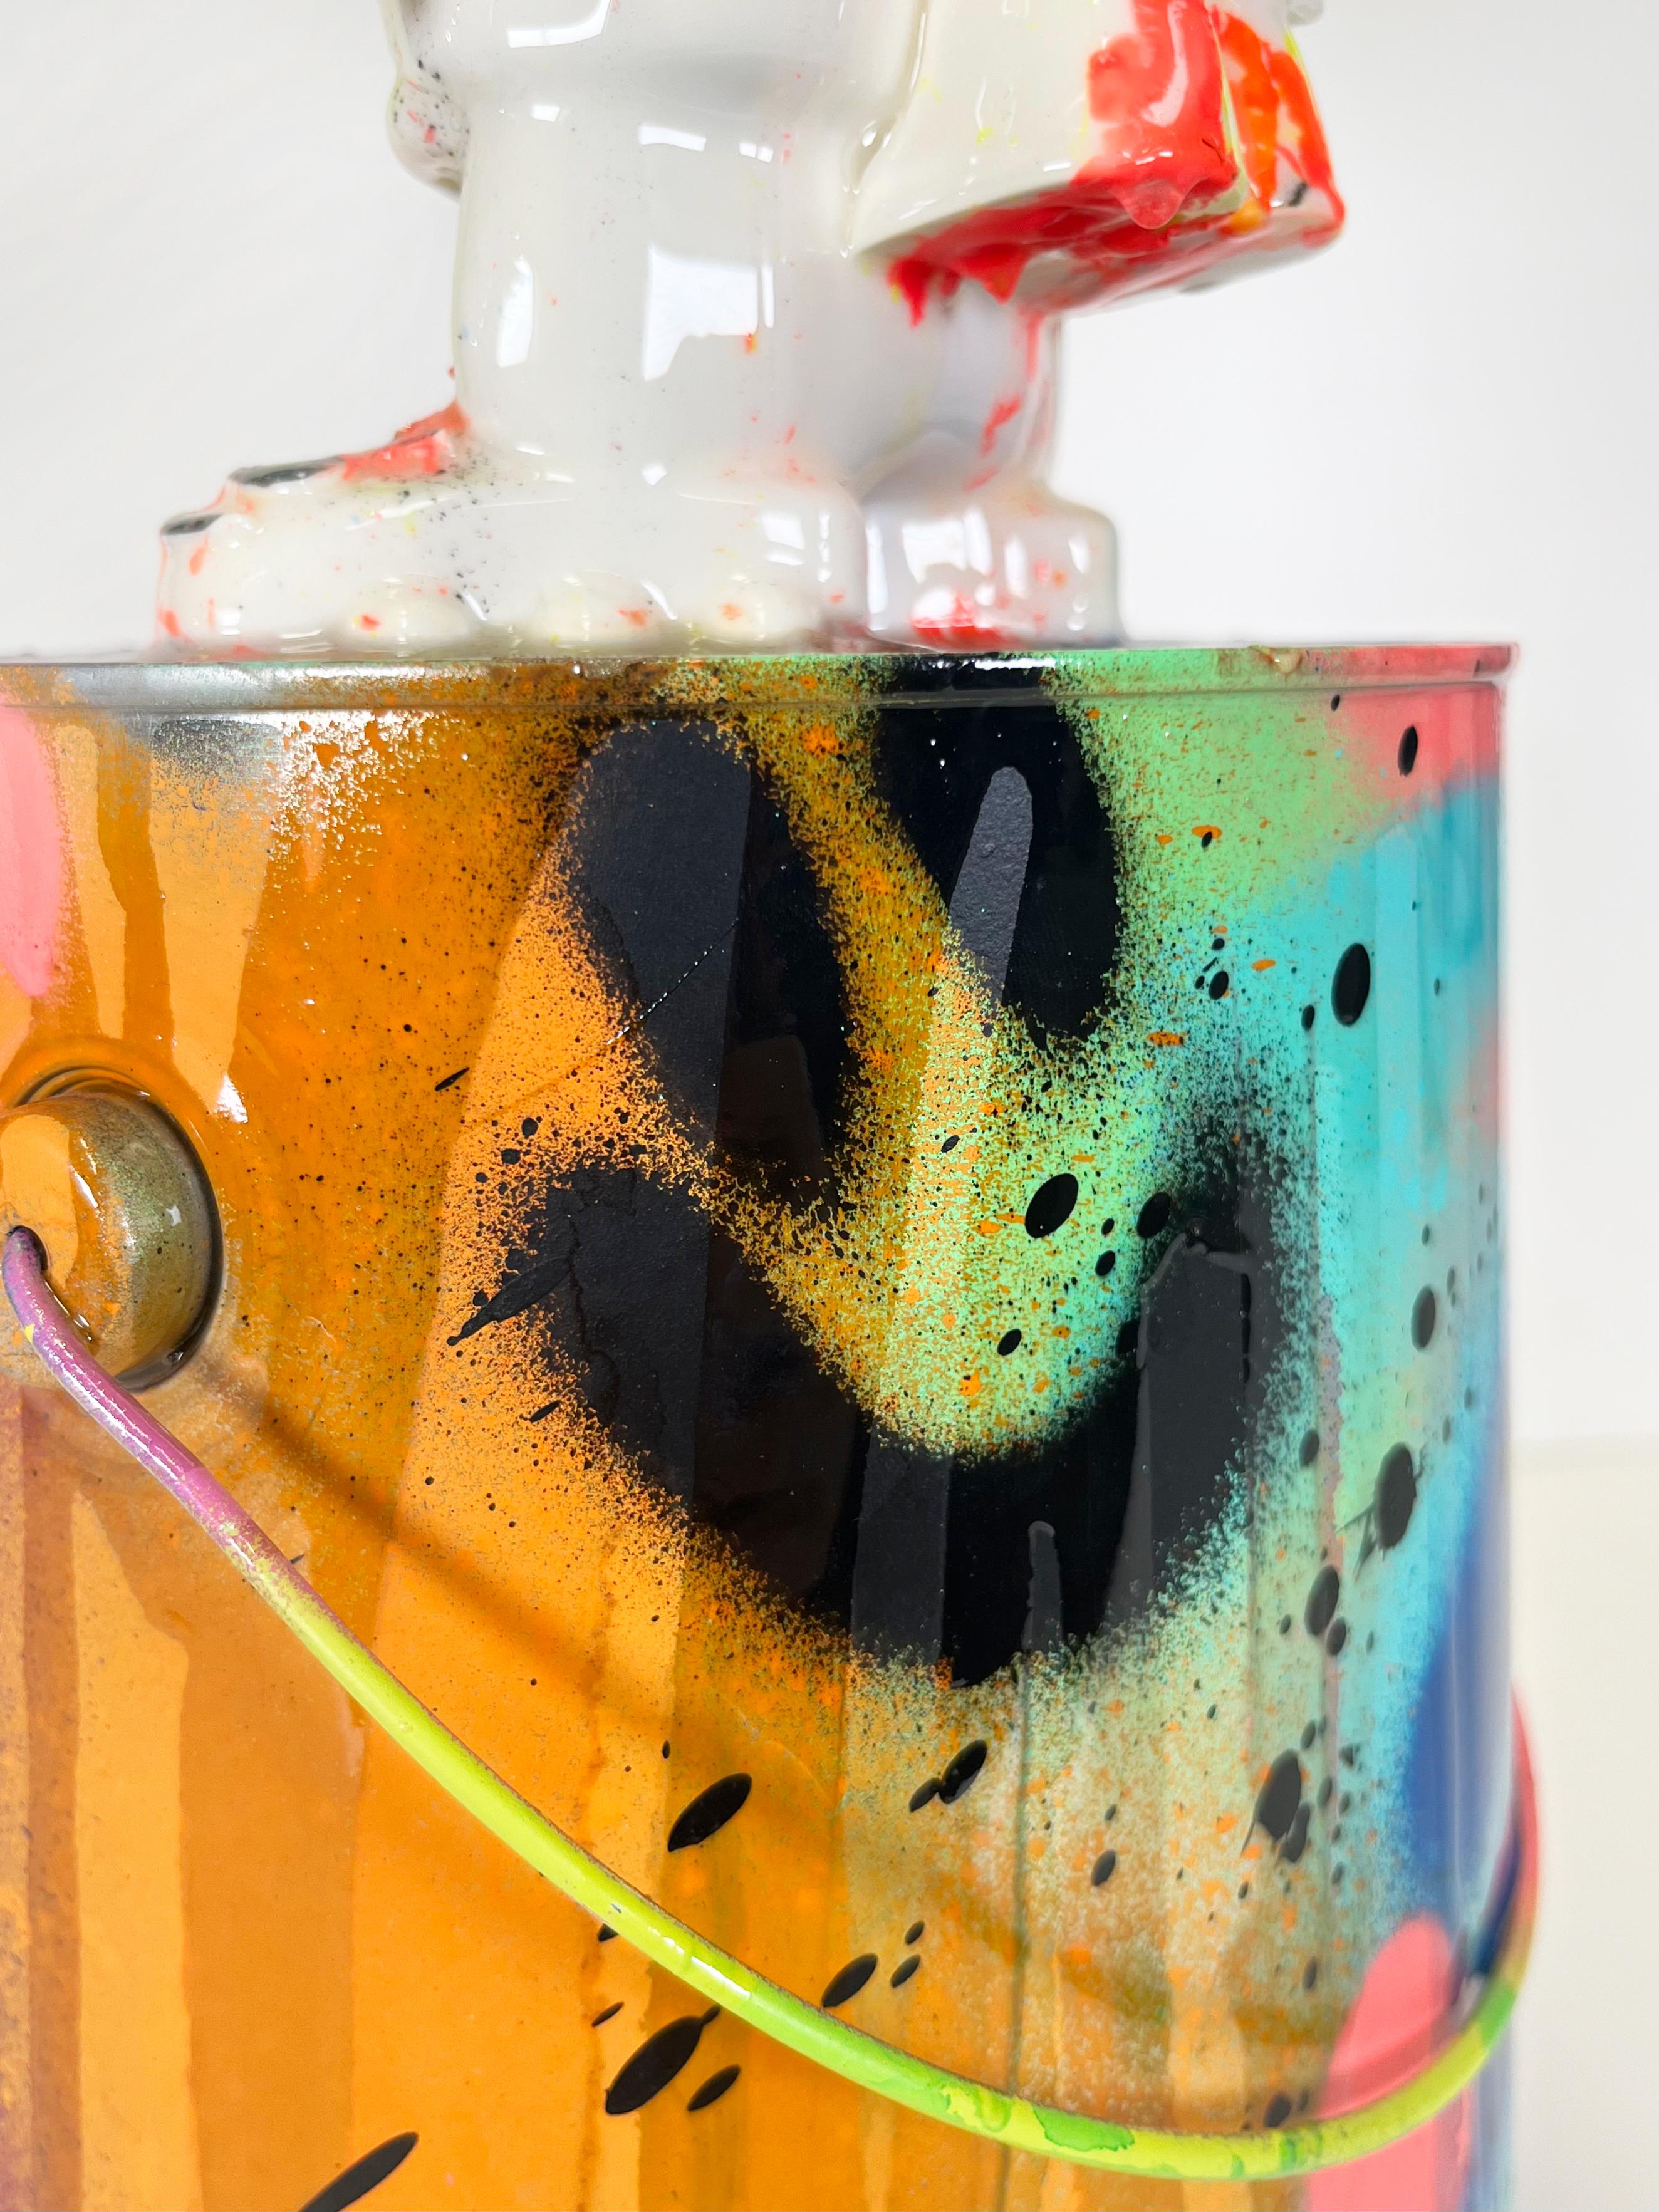 Technicolour Xeno Paint Can v2, colorful and cool resin cast figure sculpture - Gray Abstract Sculpture by Chris Solcz